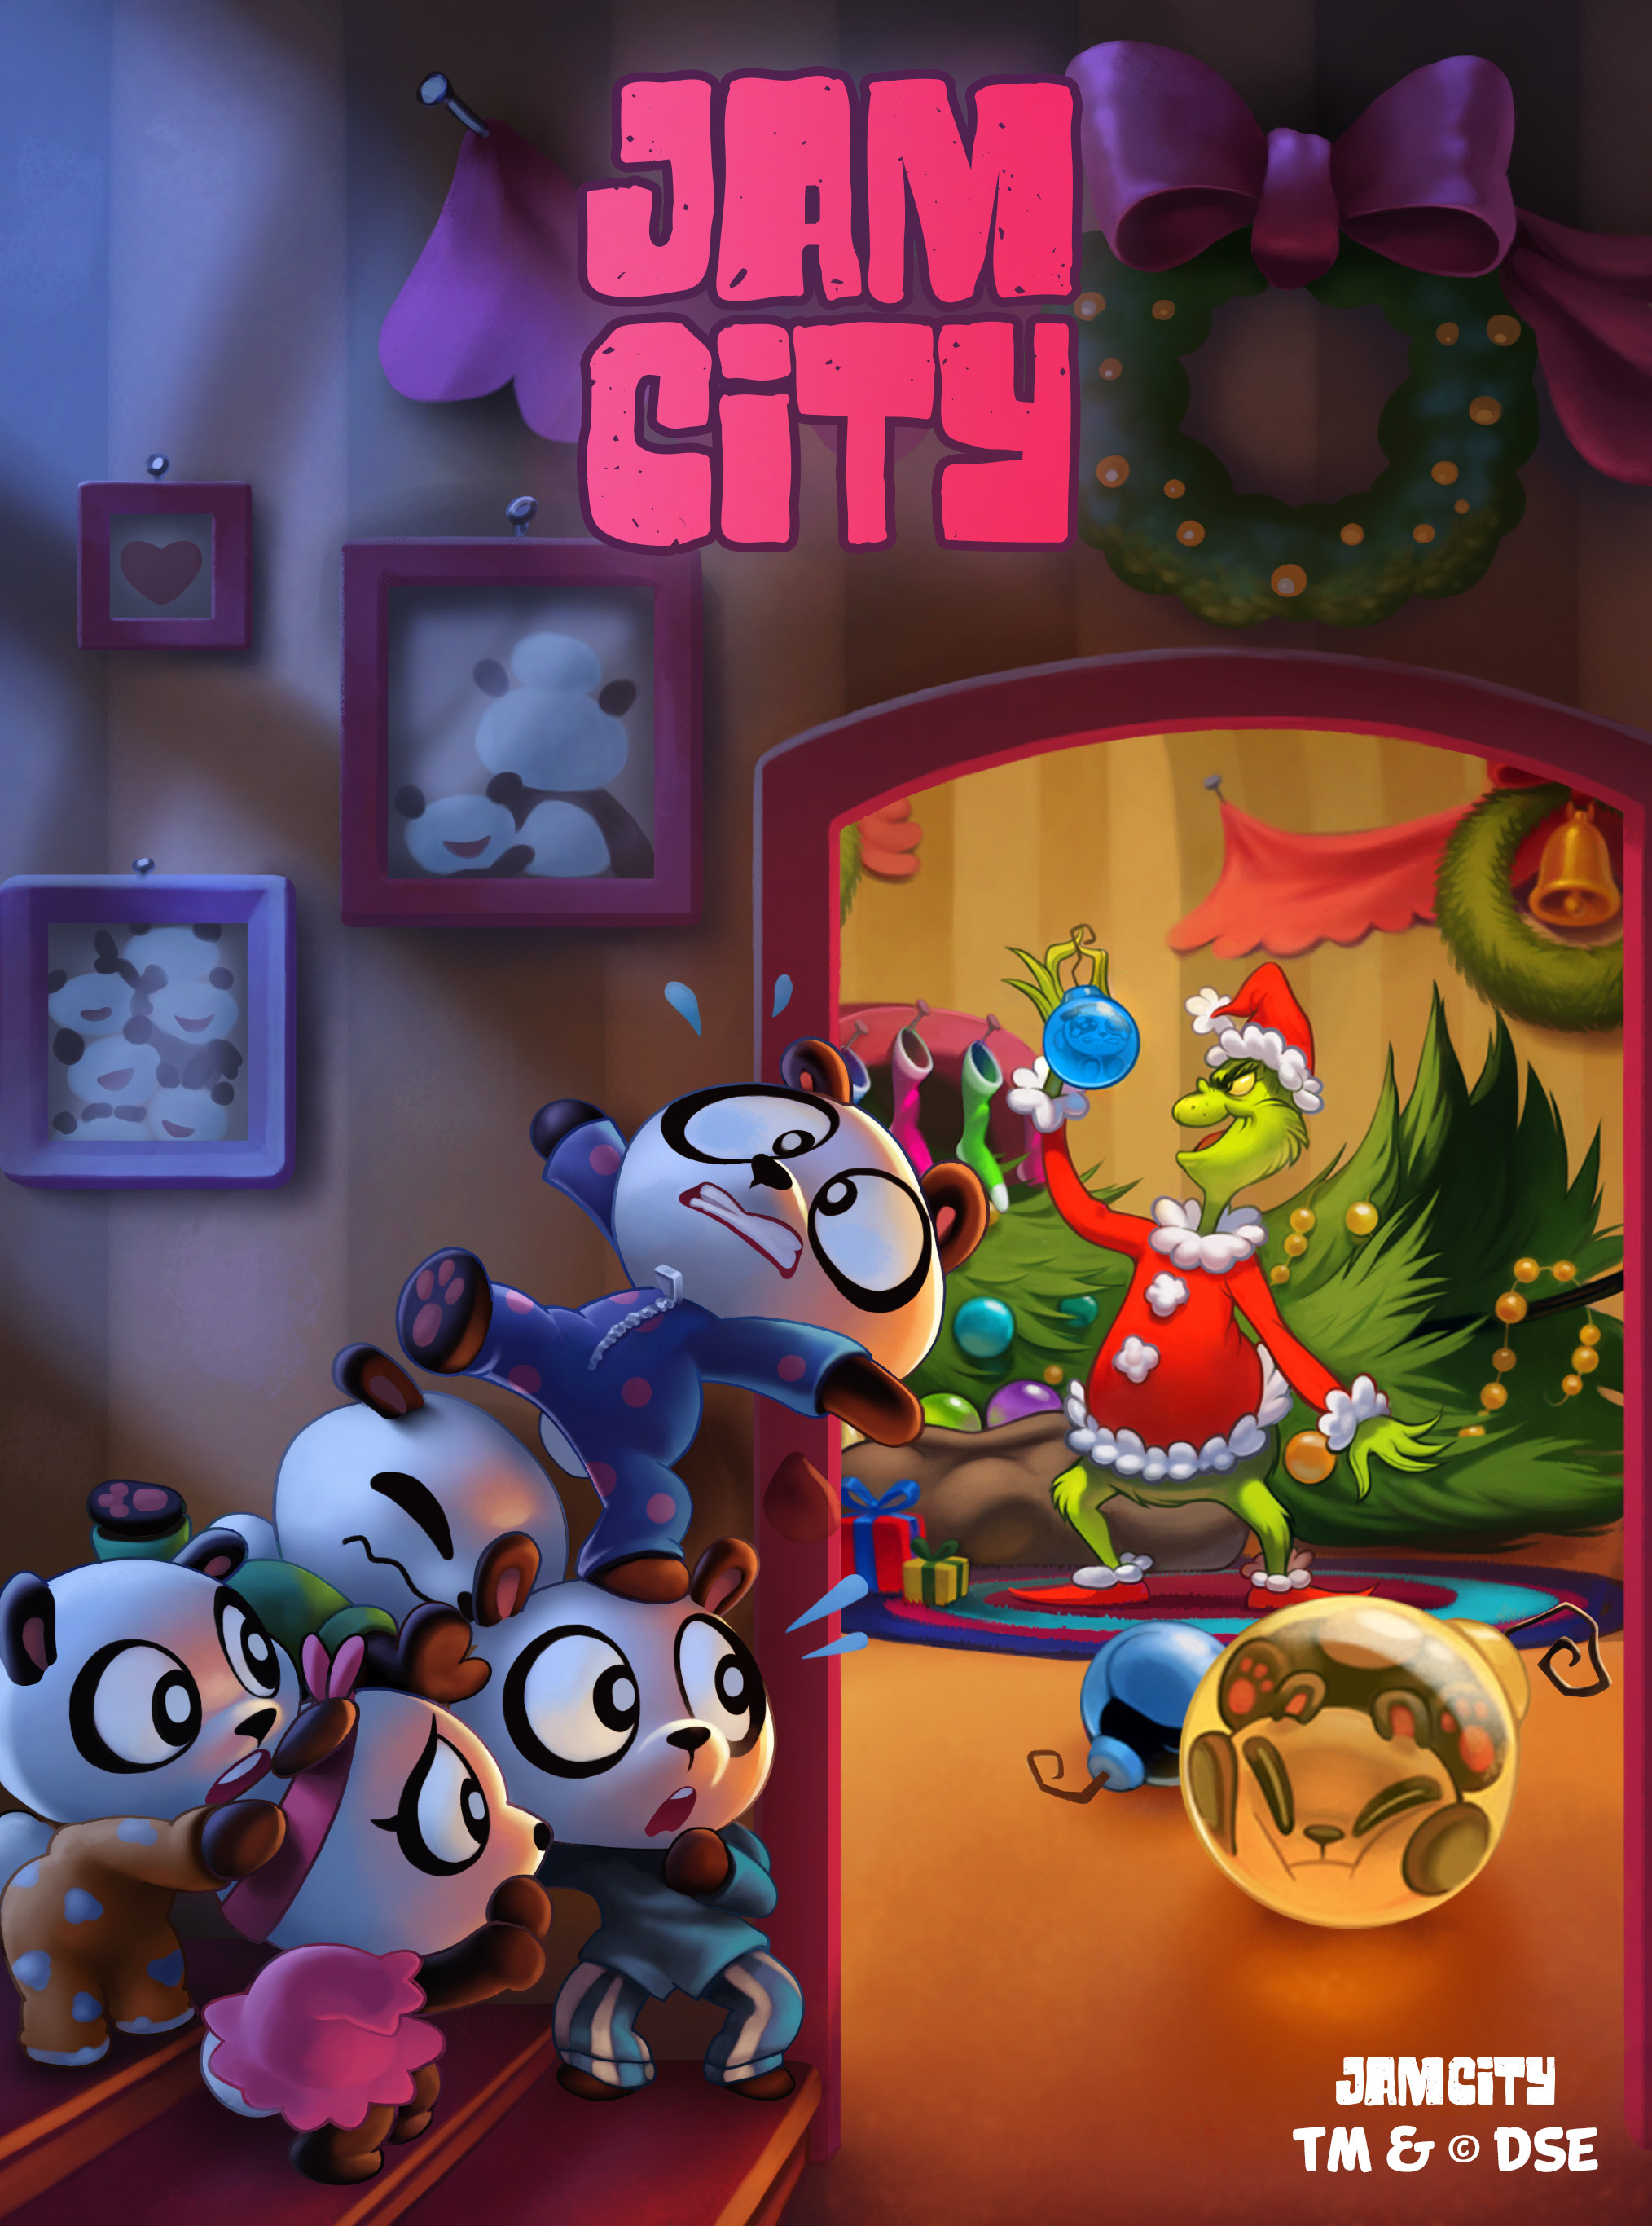 Flipper At redigere spiller Iconic Holiday Curmudgeon Returns to Mobile in Jam City's Panda Pop  “Grinchmas” Takeover | Business Wire